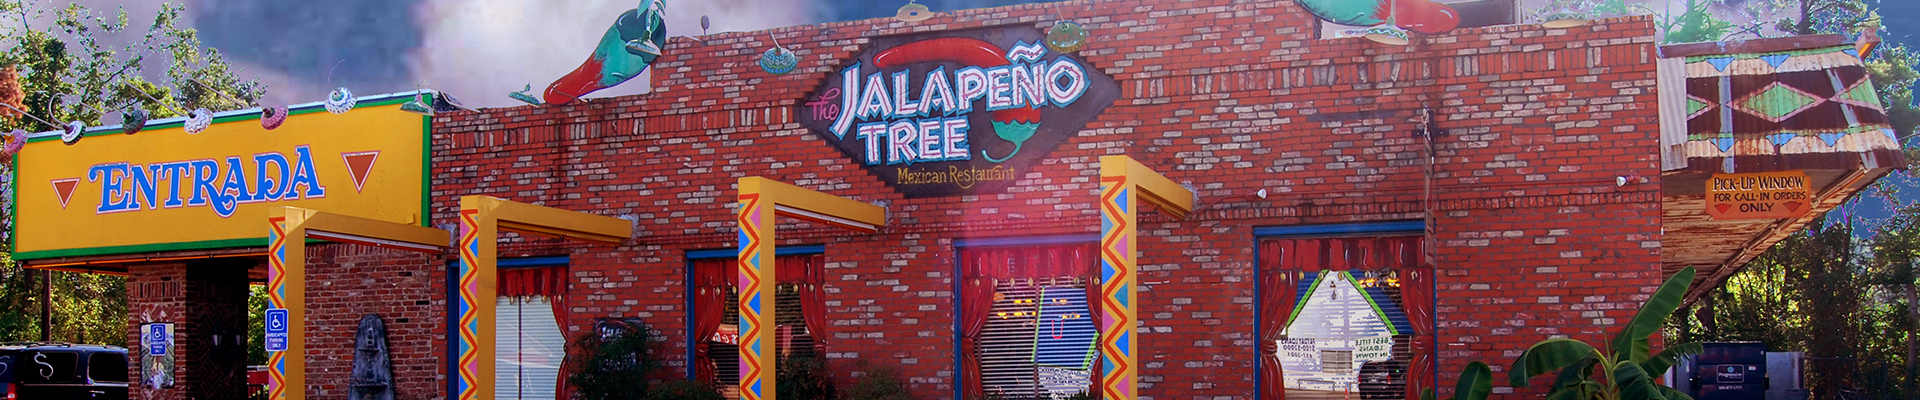 Entrance in Jalapeno Tree Mexican restaurant in Henderson, Texas